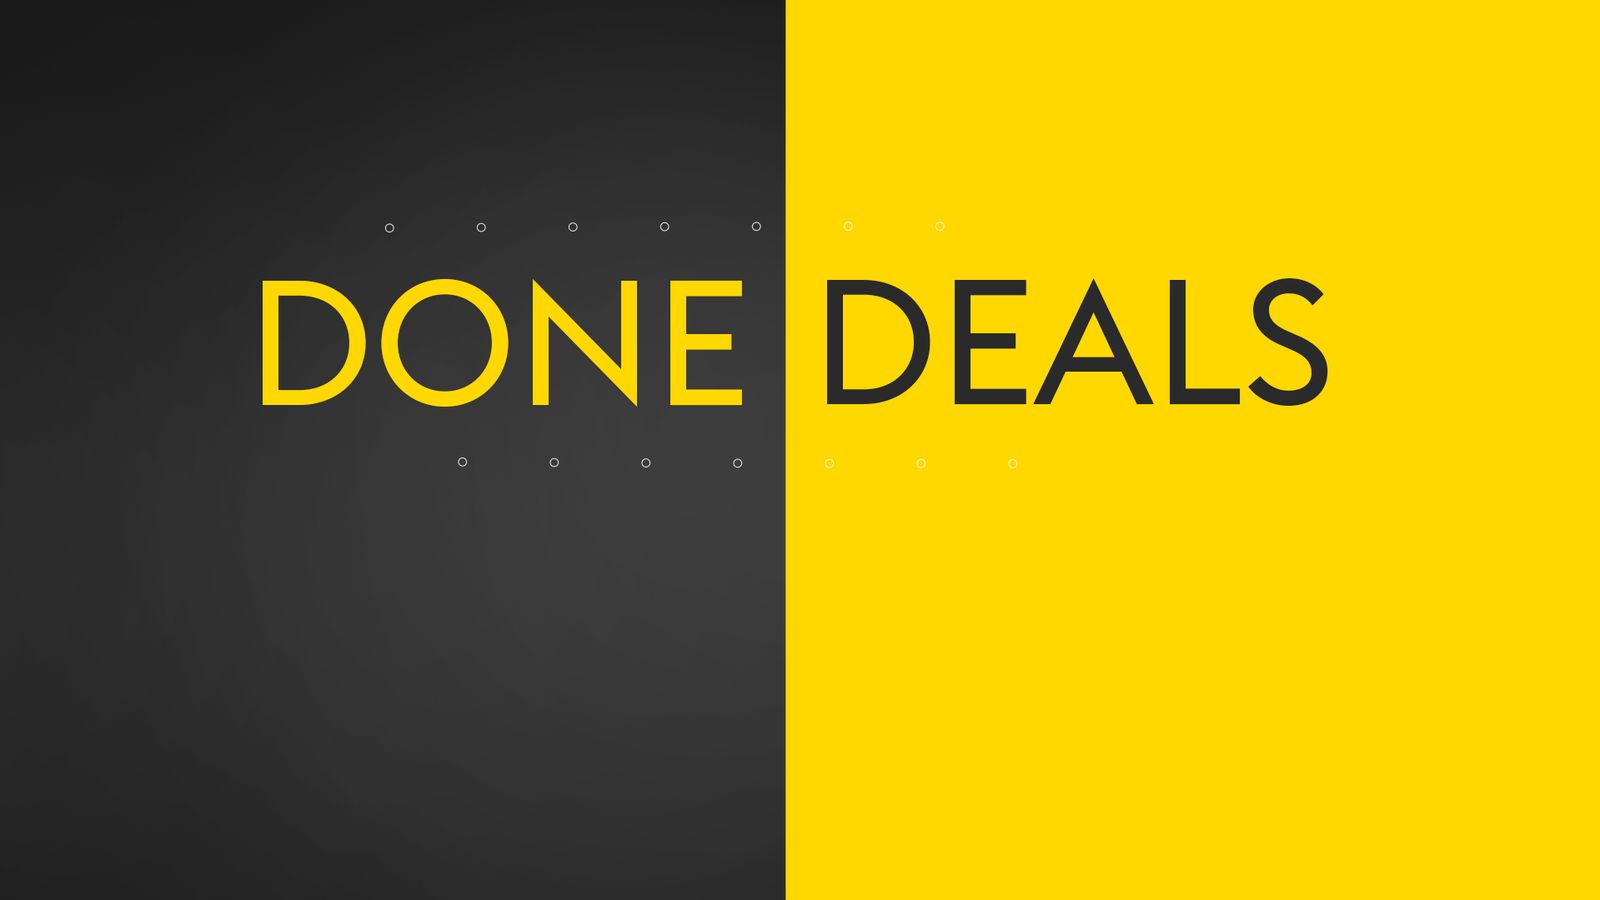 January transfer window and Deadline Day Done deals Football News